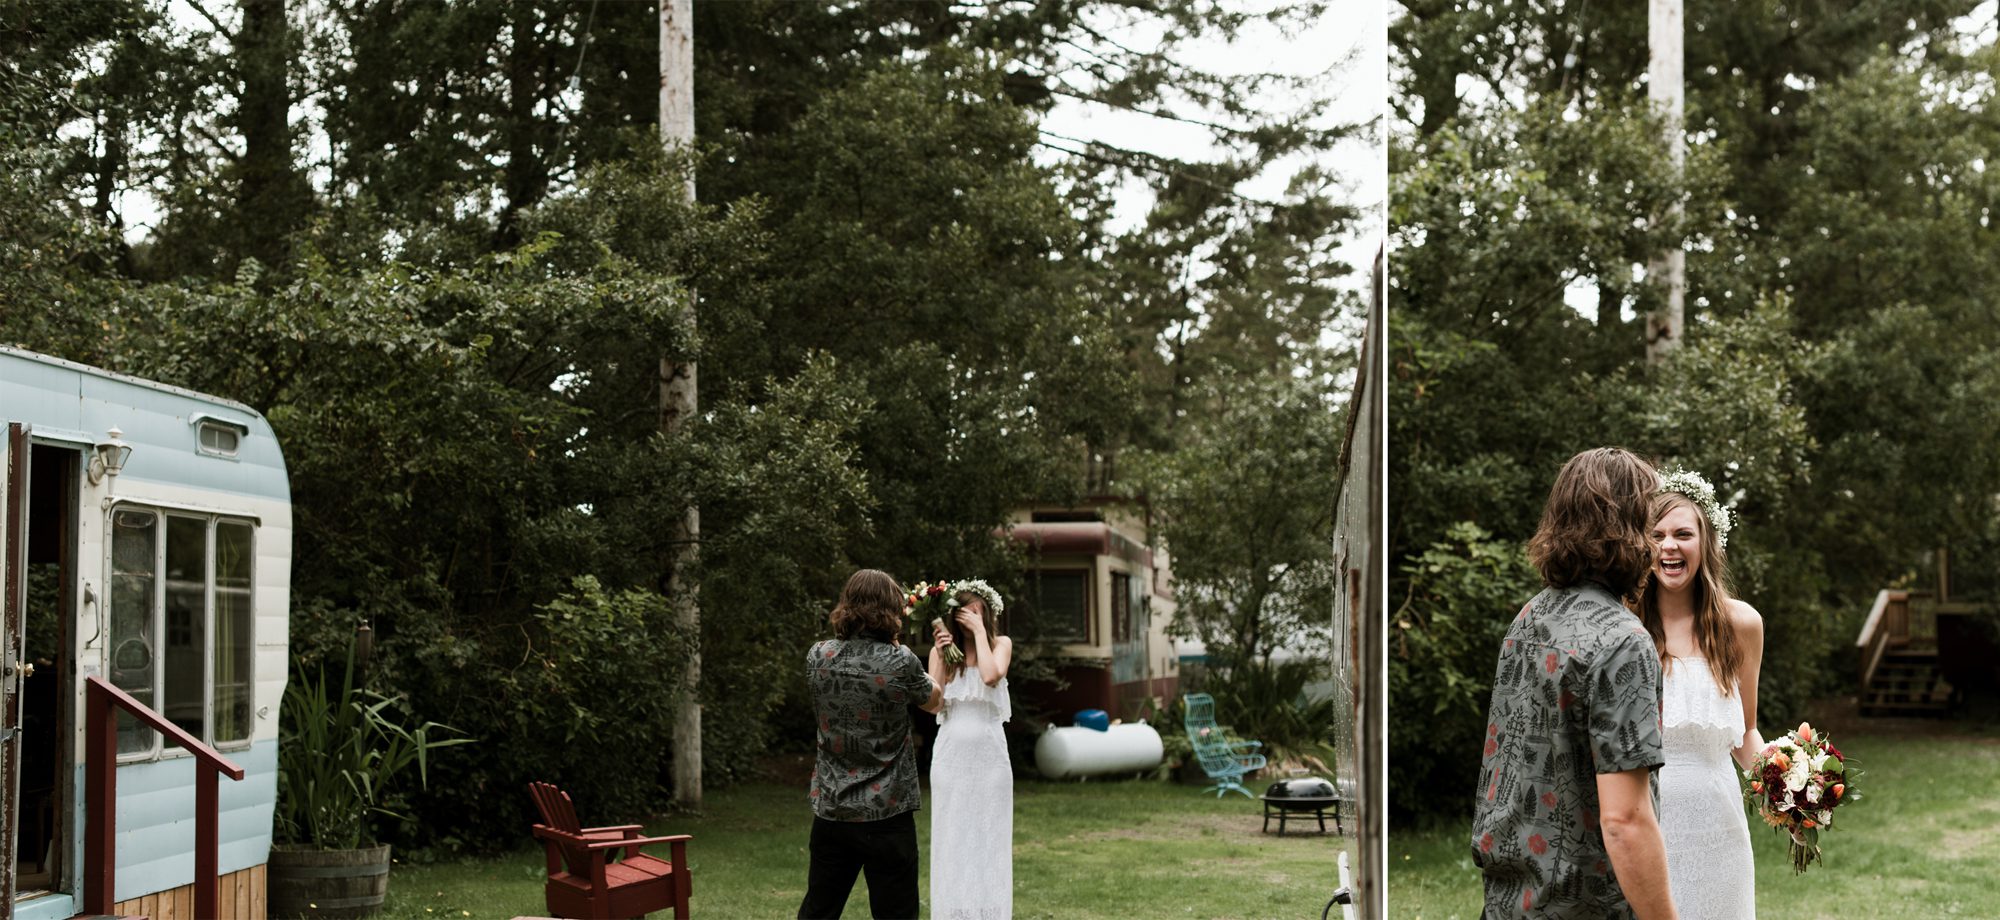 The bride and groom see each other for the first time on their wedding day. By Long Beach, Washington wedding photographer Briana Morrison